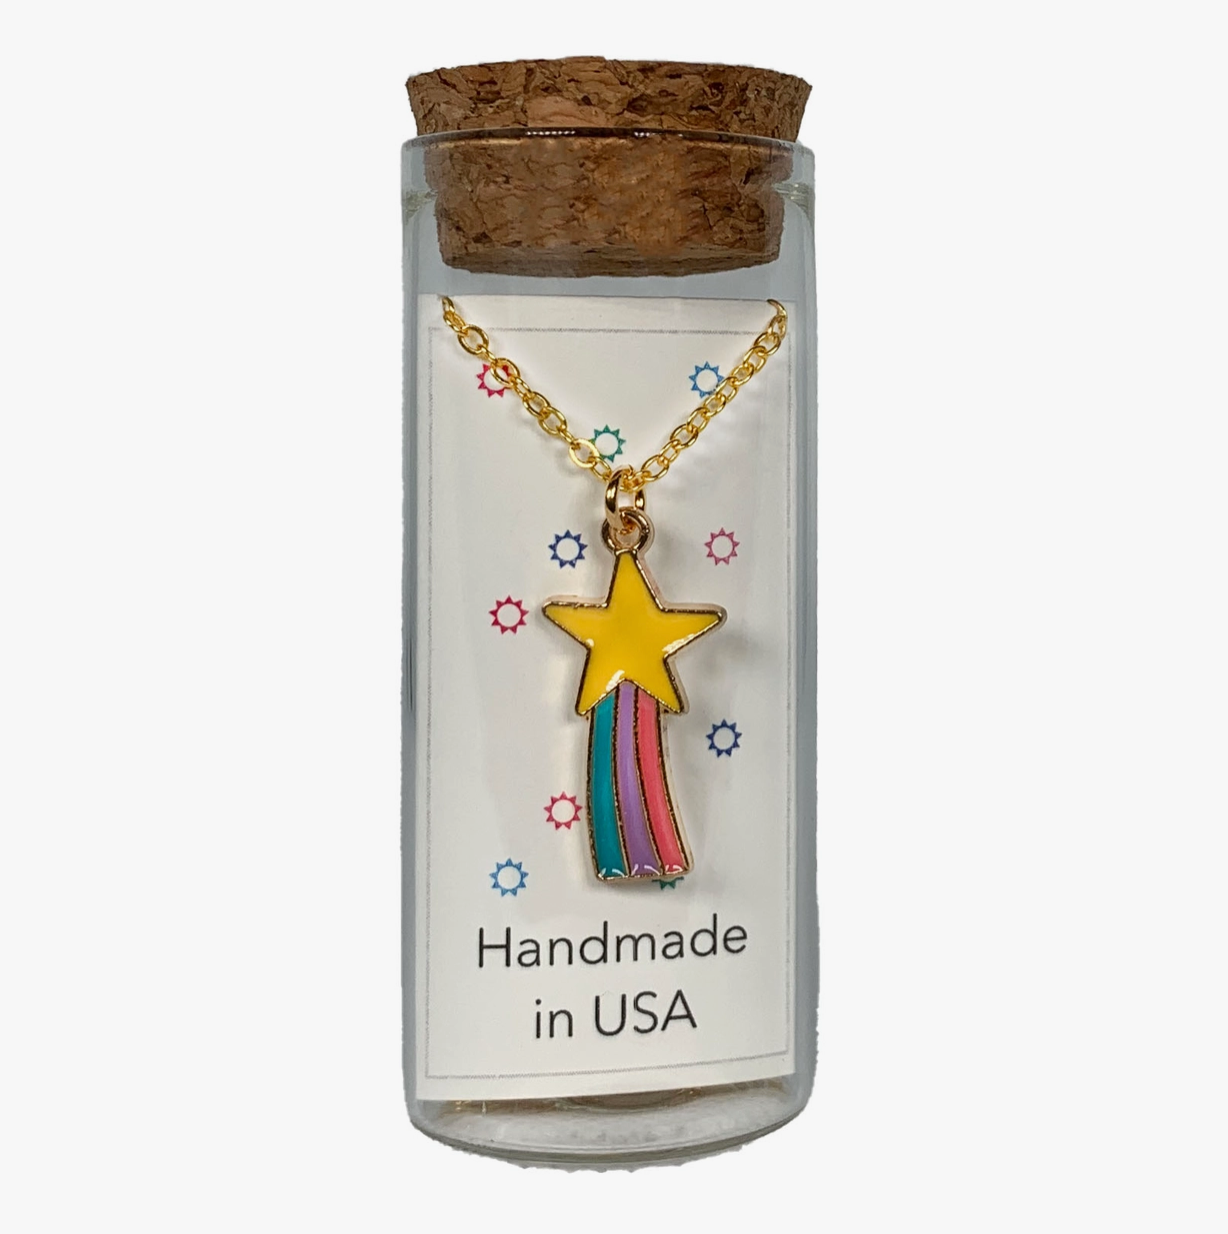 Shooting Star Charm Necklace in A Bottle - 16 Inch